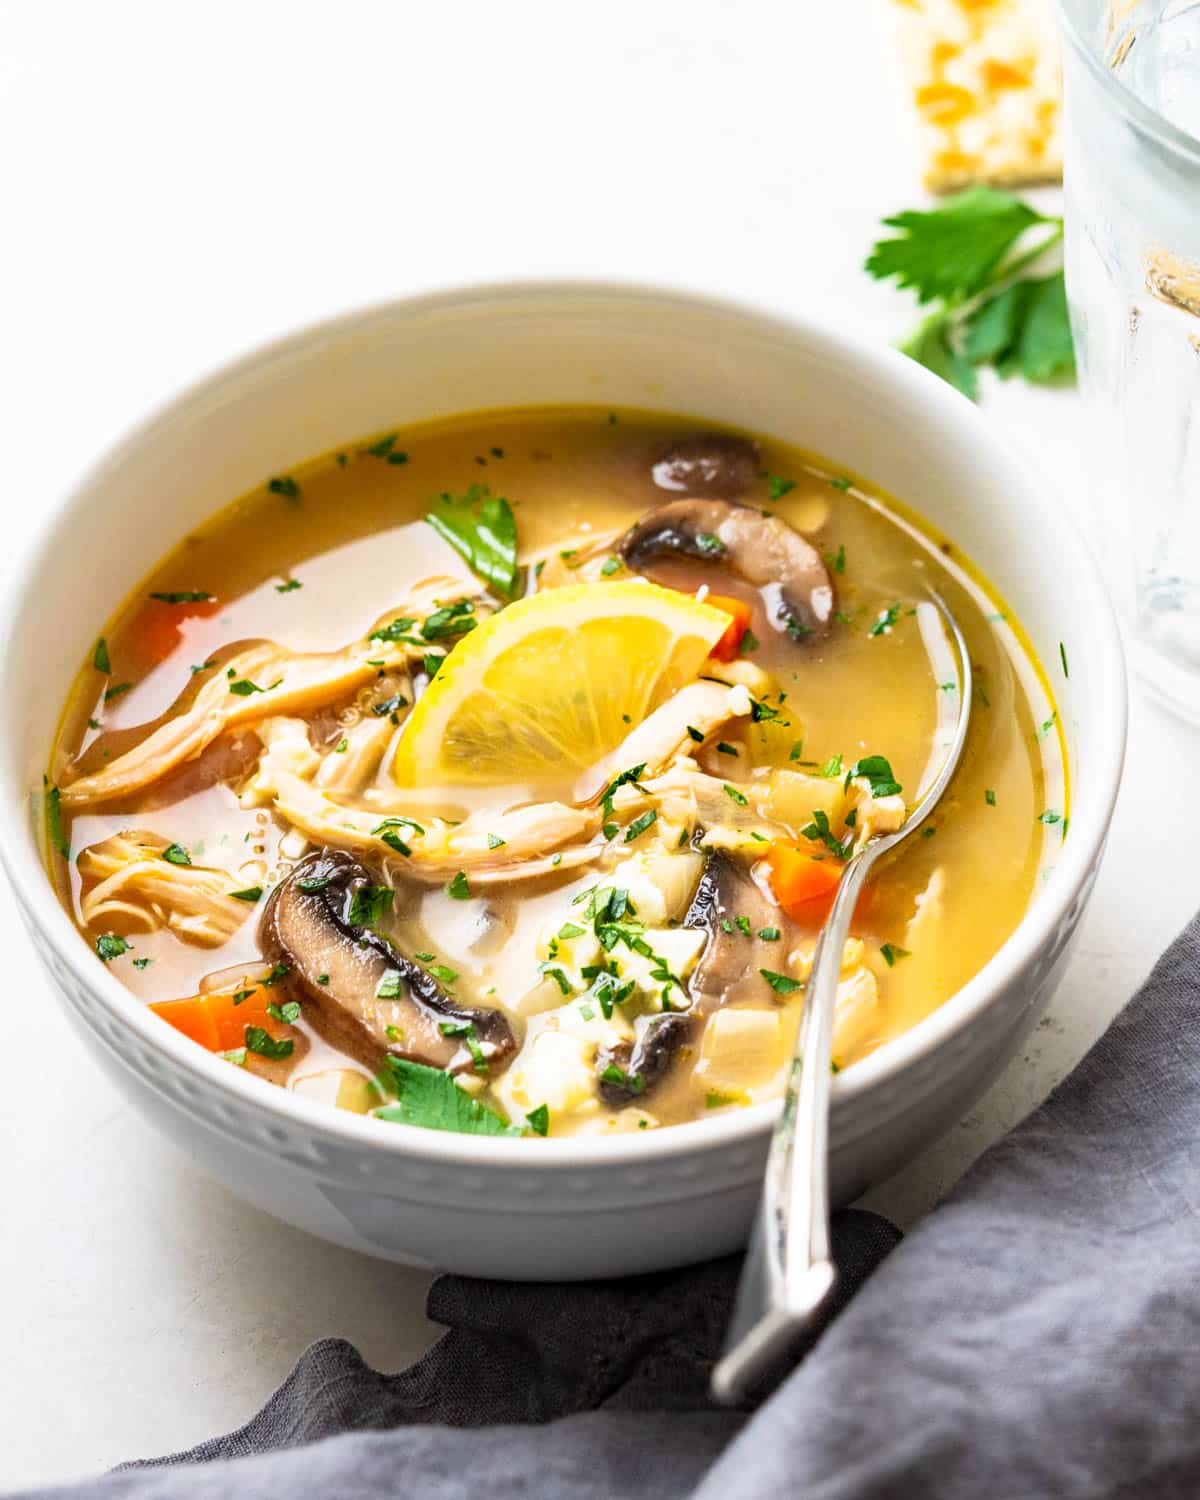 A bowl of lemon chicken soup with quinoa and slice of lemon.